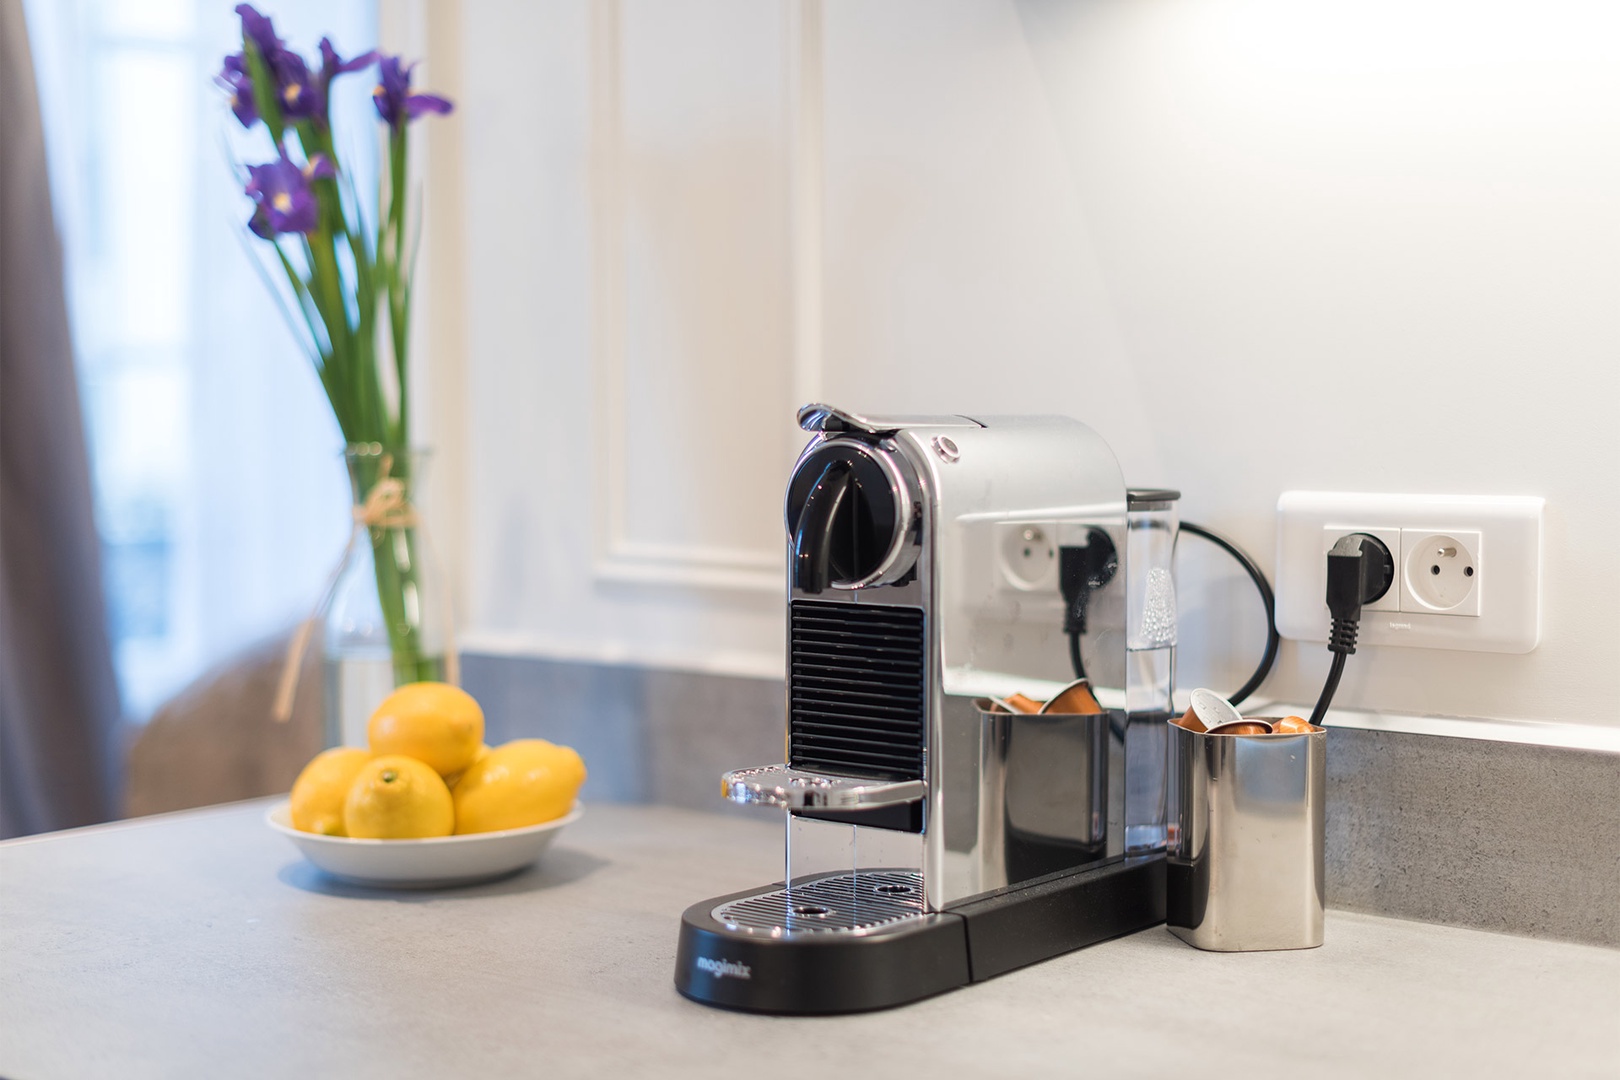 Nespresso machine for your morning coffee